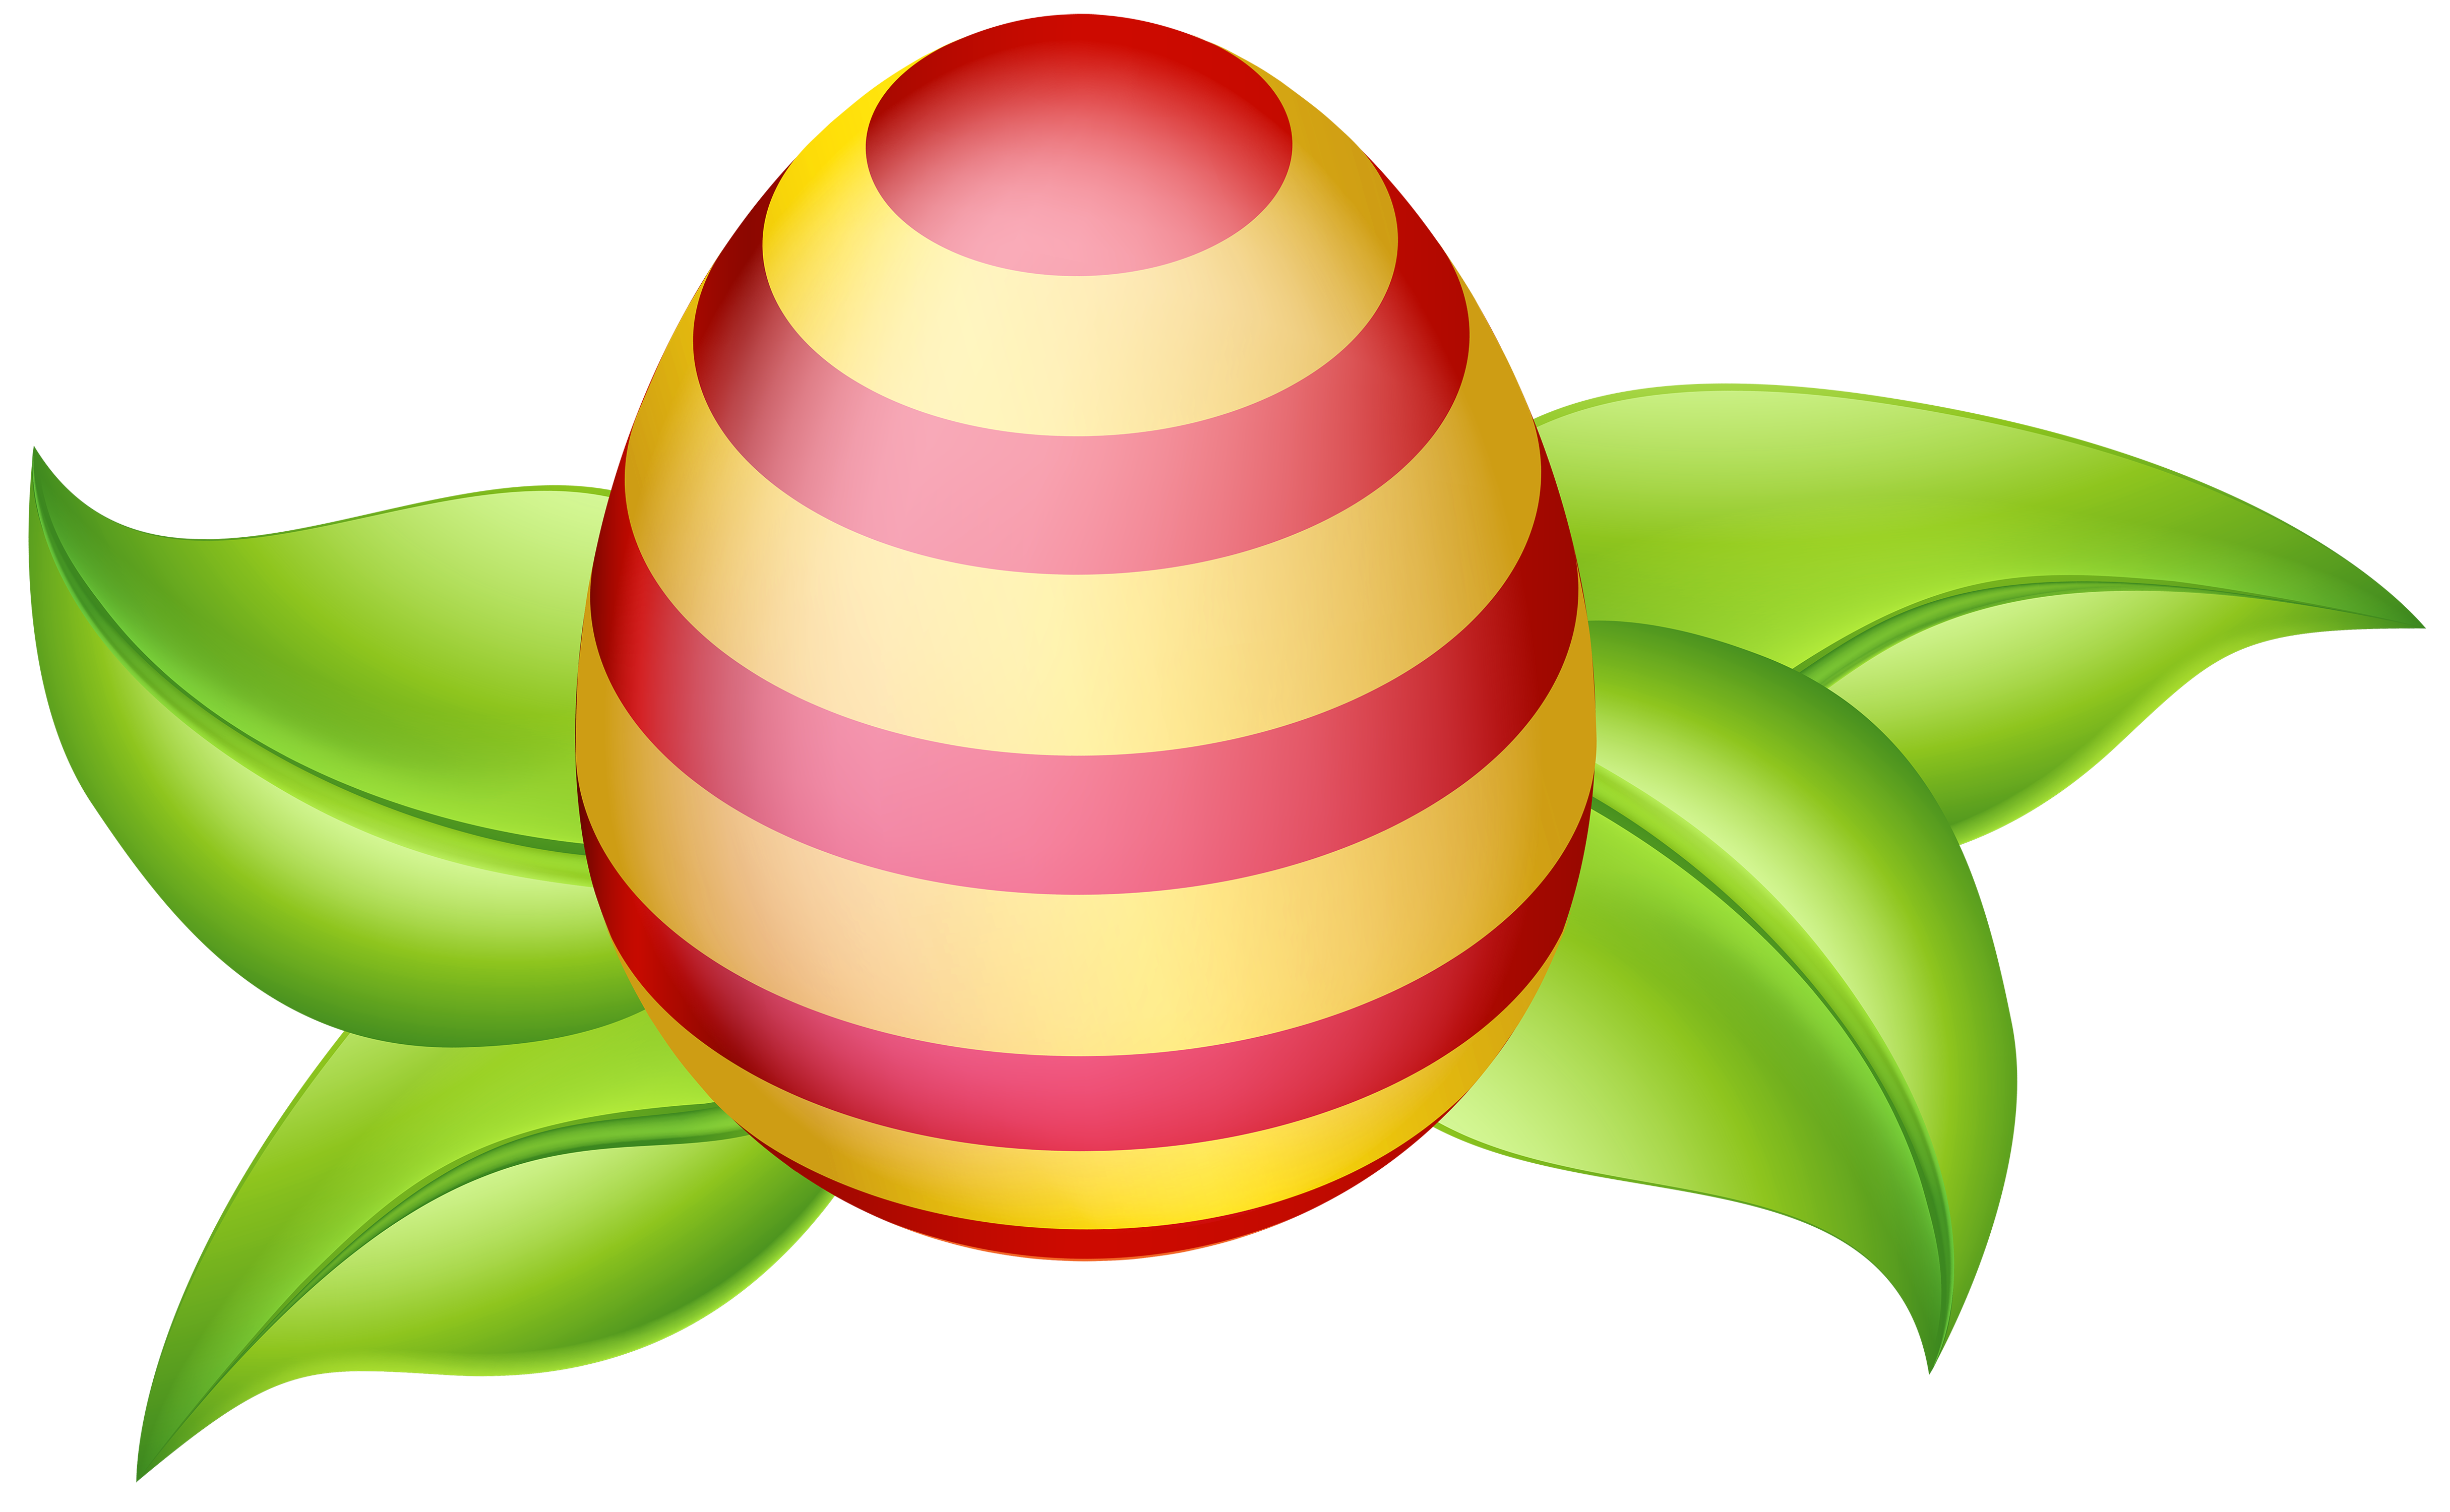 Easter Egg with Spring Leaves PNG Clip Art Image | Gallery ...